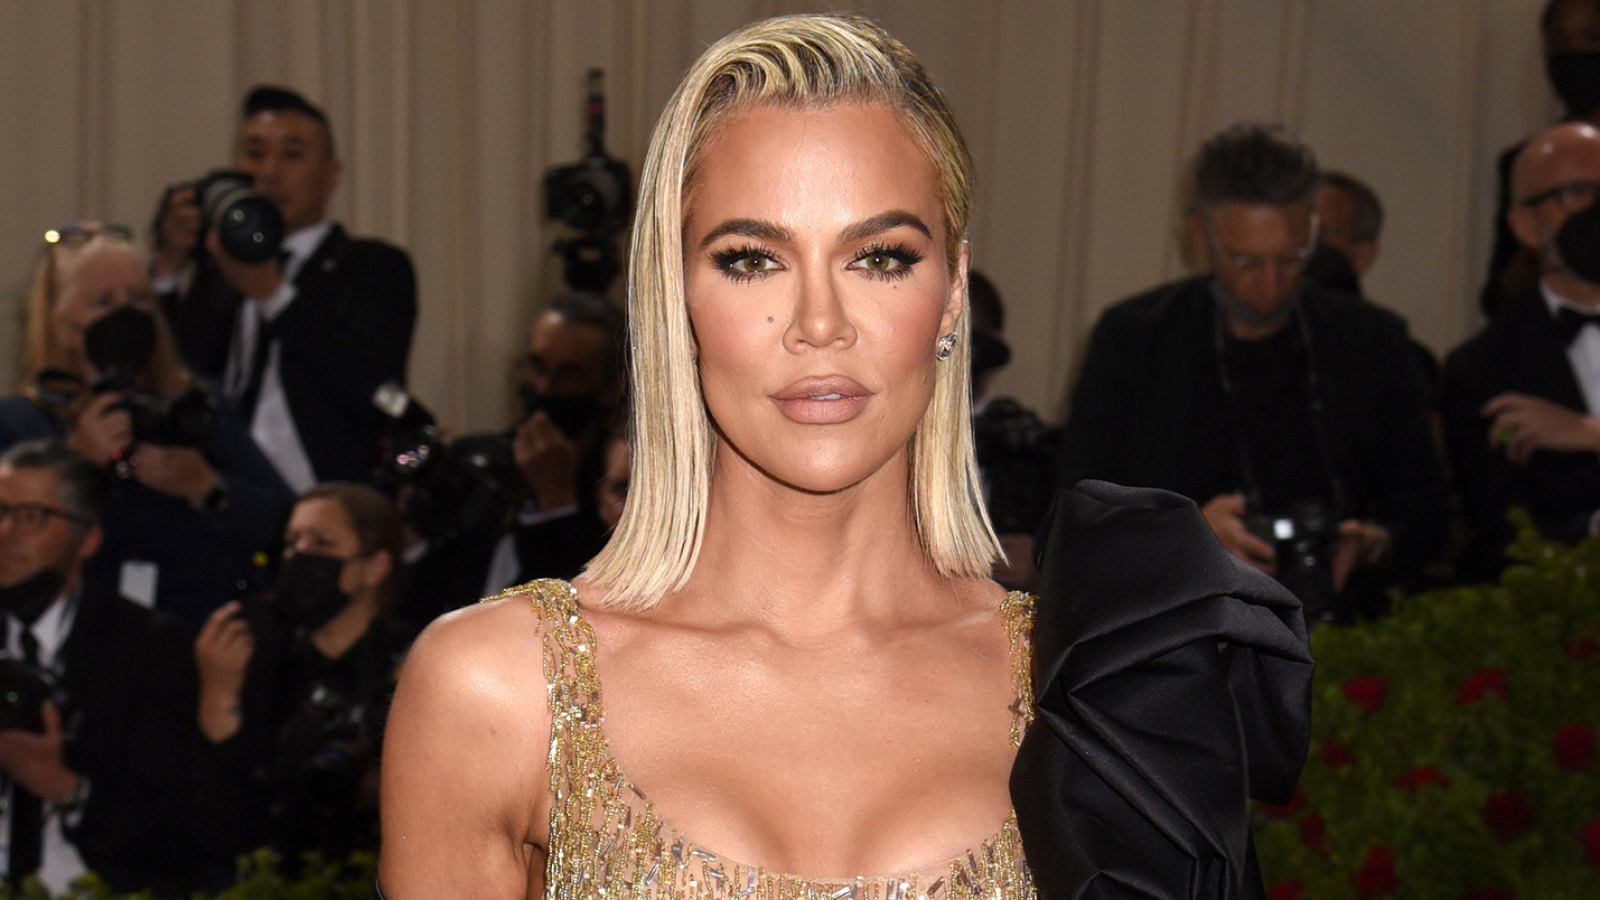 Khloe Kardashian ‘Can’t Wait’ to Be in Her 40s After Turning 39: I'm in 'The Worst Decade'